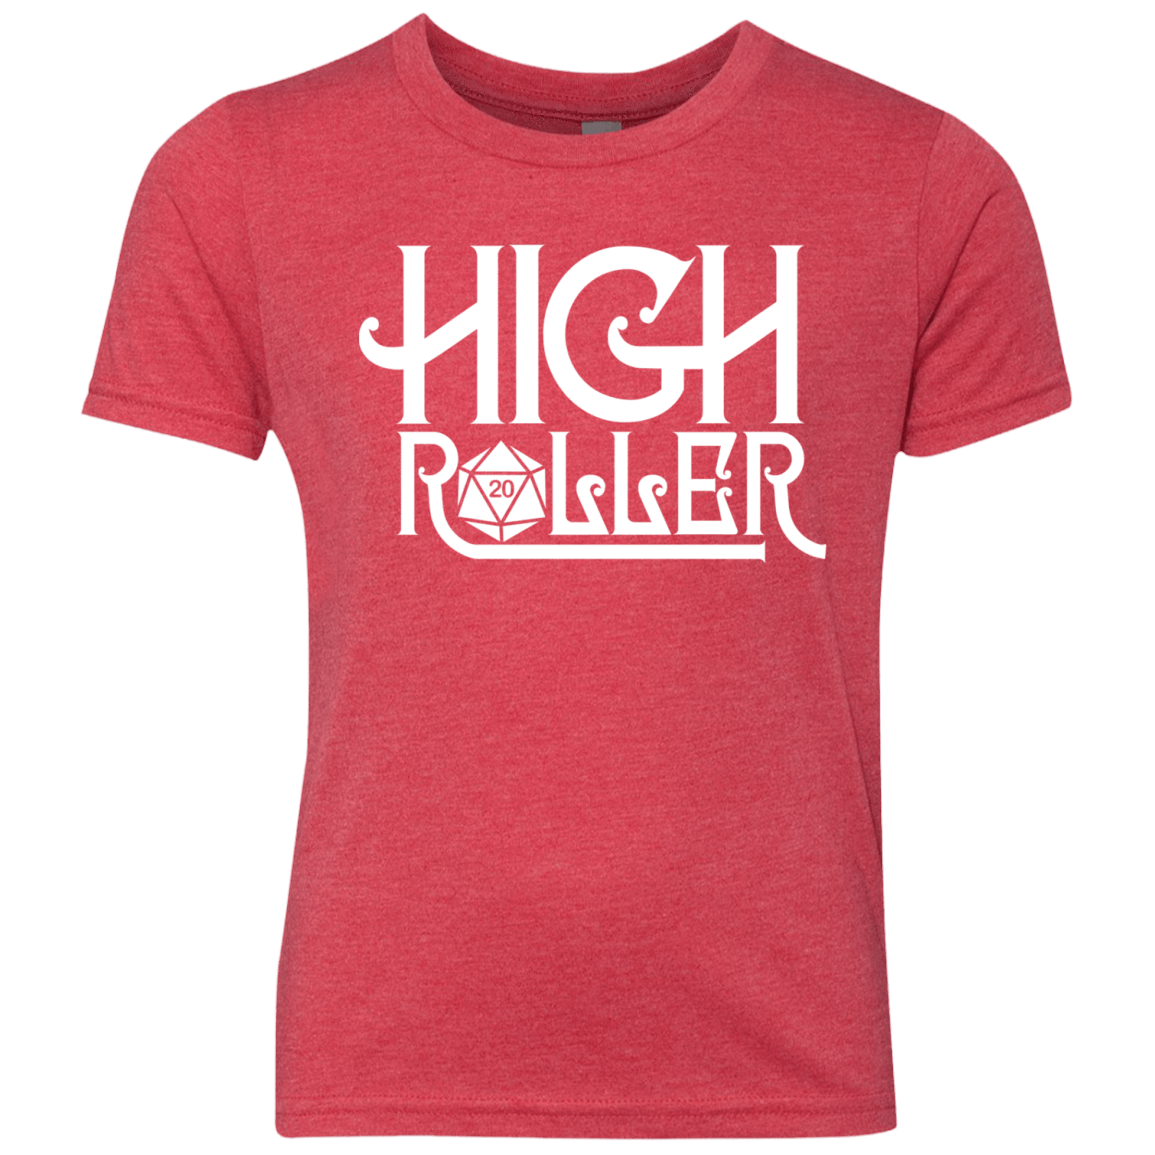 T-Shirts Vintage Red / YXS High Roller Youth Triblend T-Shirt